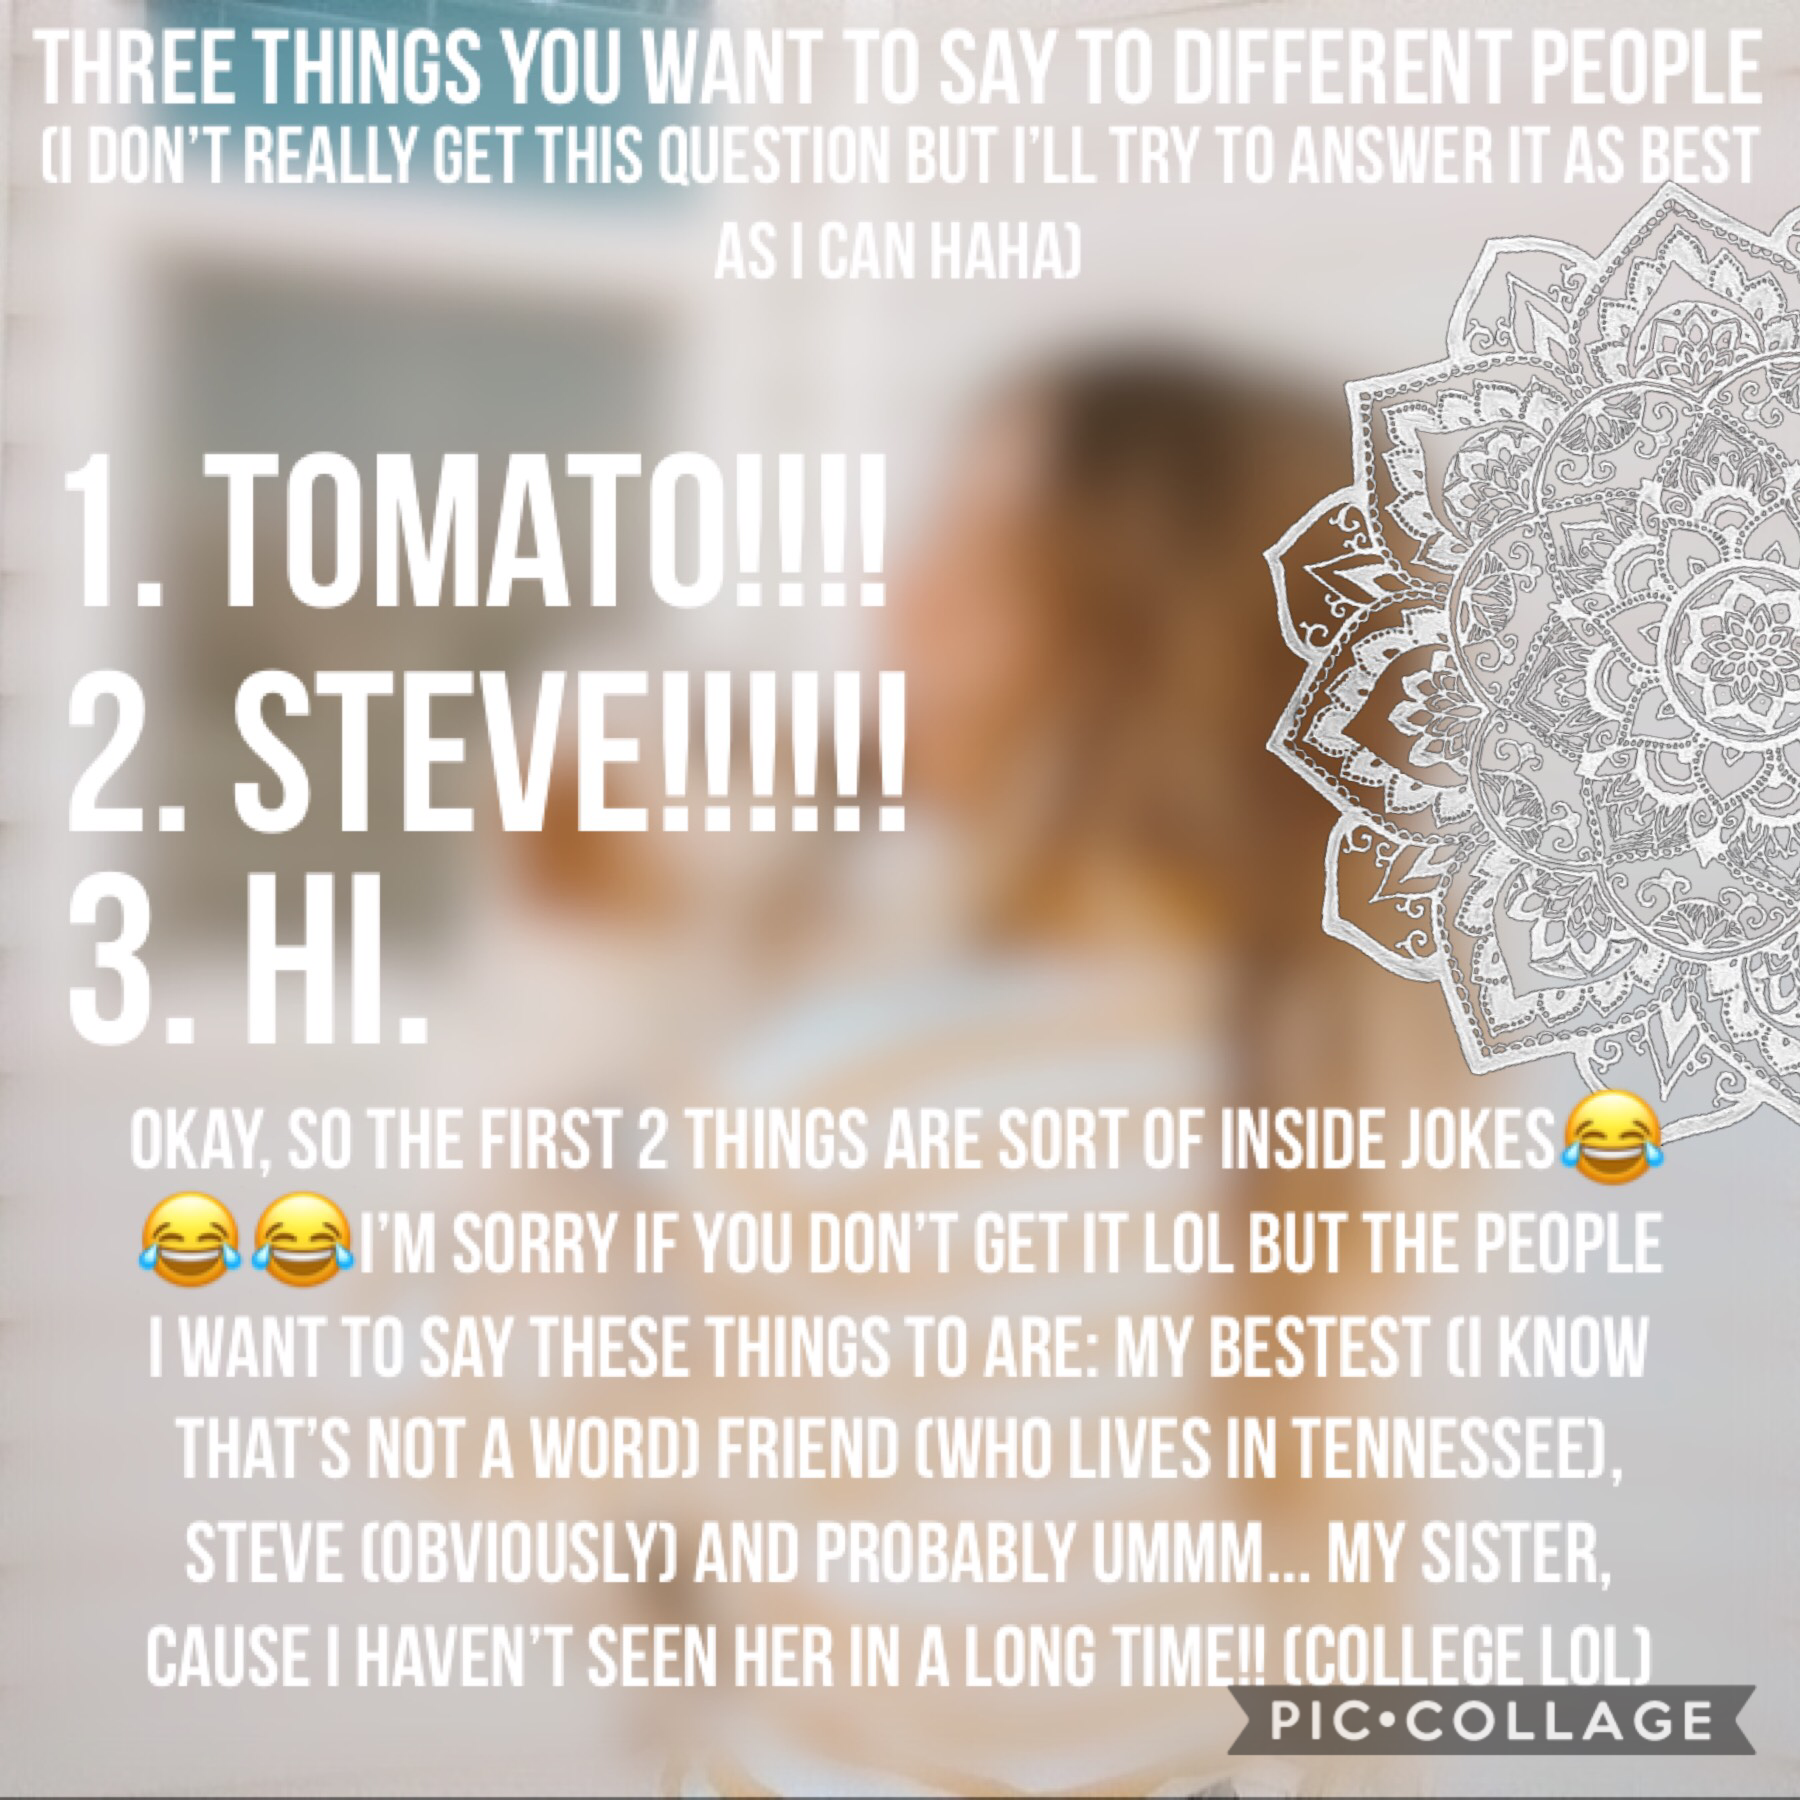 So I didn’t really get this haha😂😂but I tried to answer it as best as I could. Actually the tomato!!! thing and the Steve!!!! Thing are both memories from camp(I know that doesn’t make sense😂sry) anyway. This was rly random